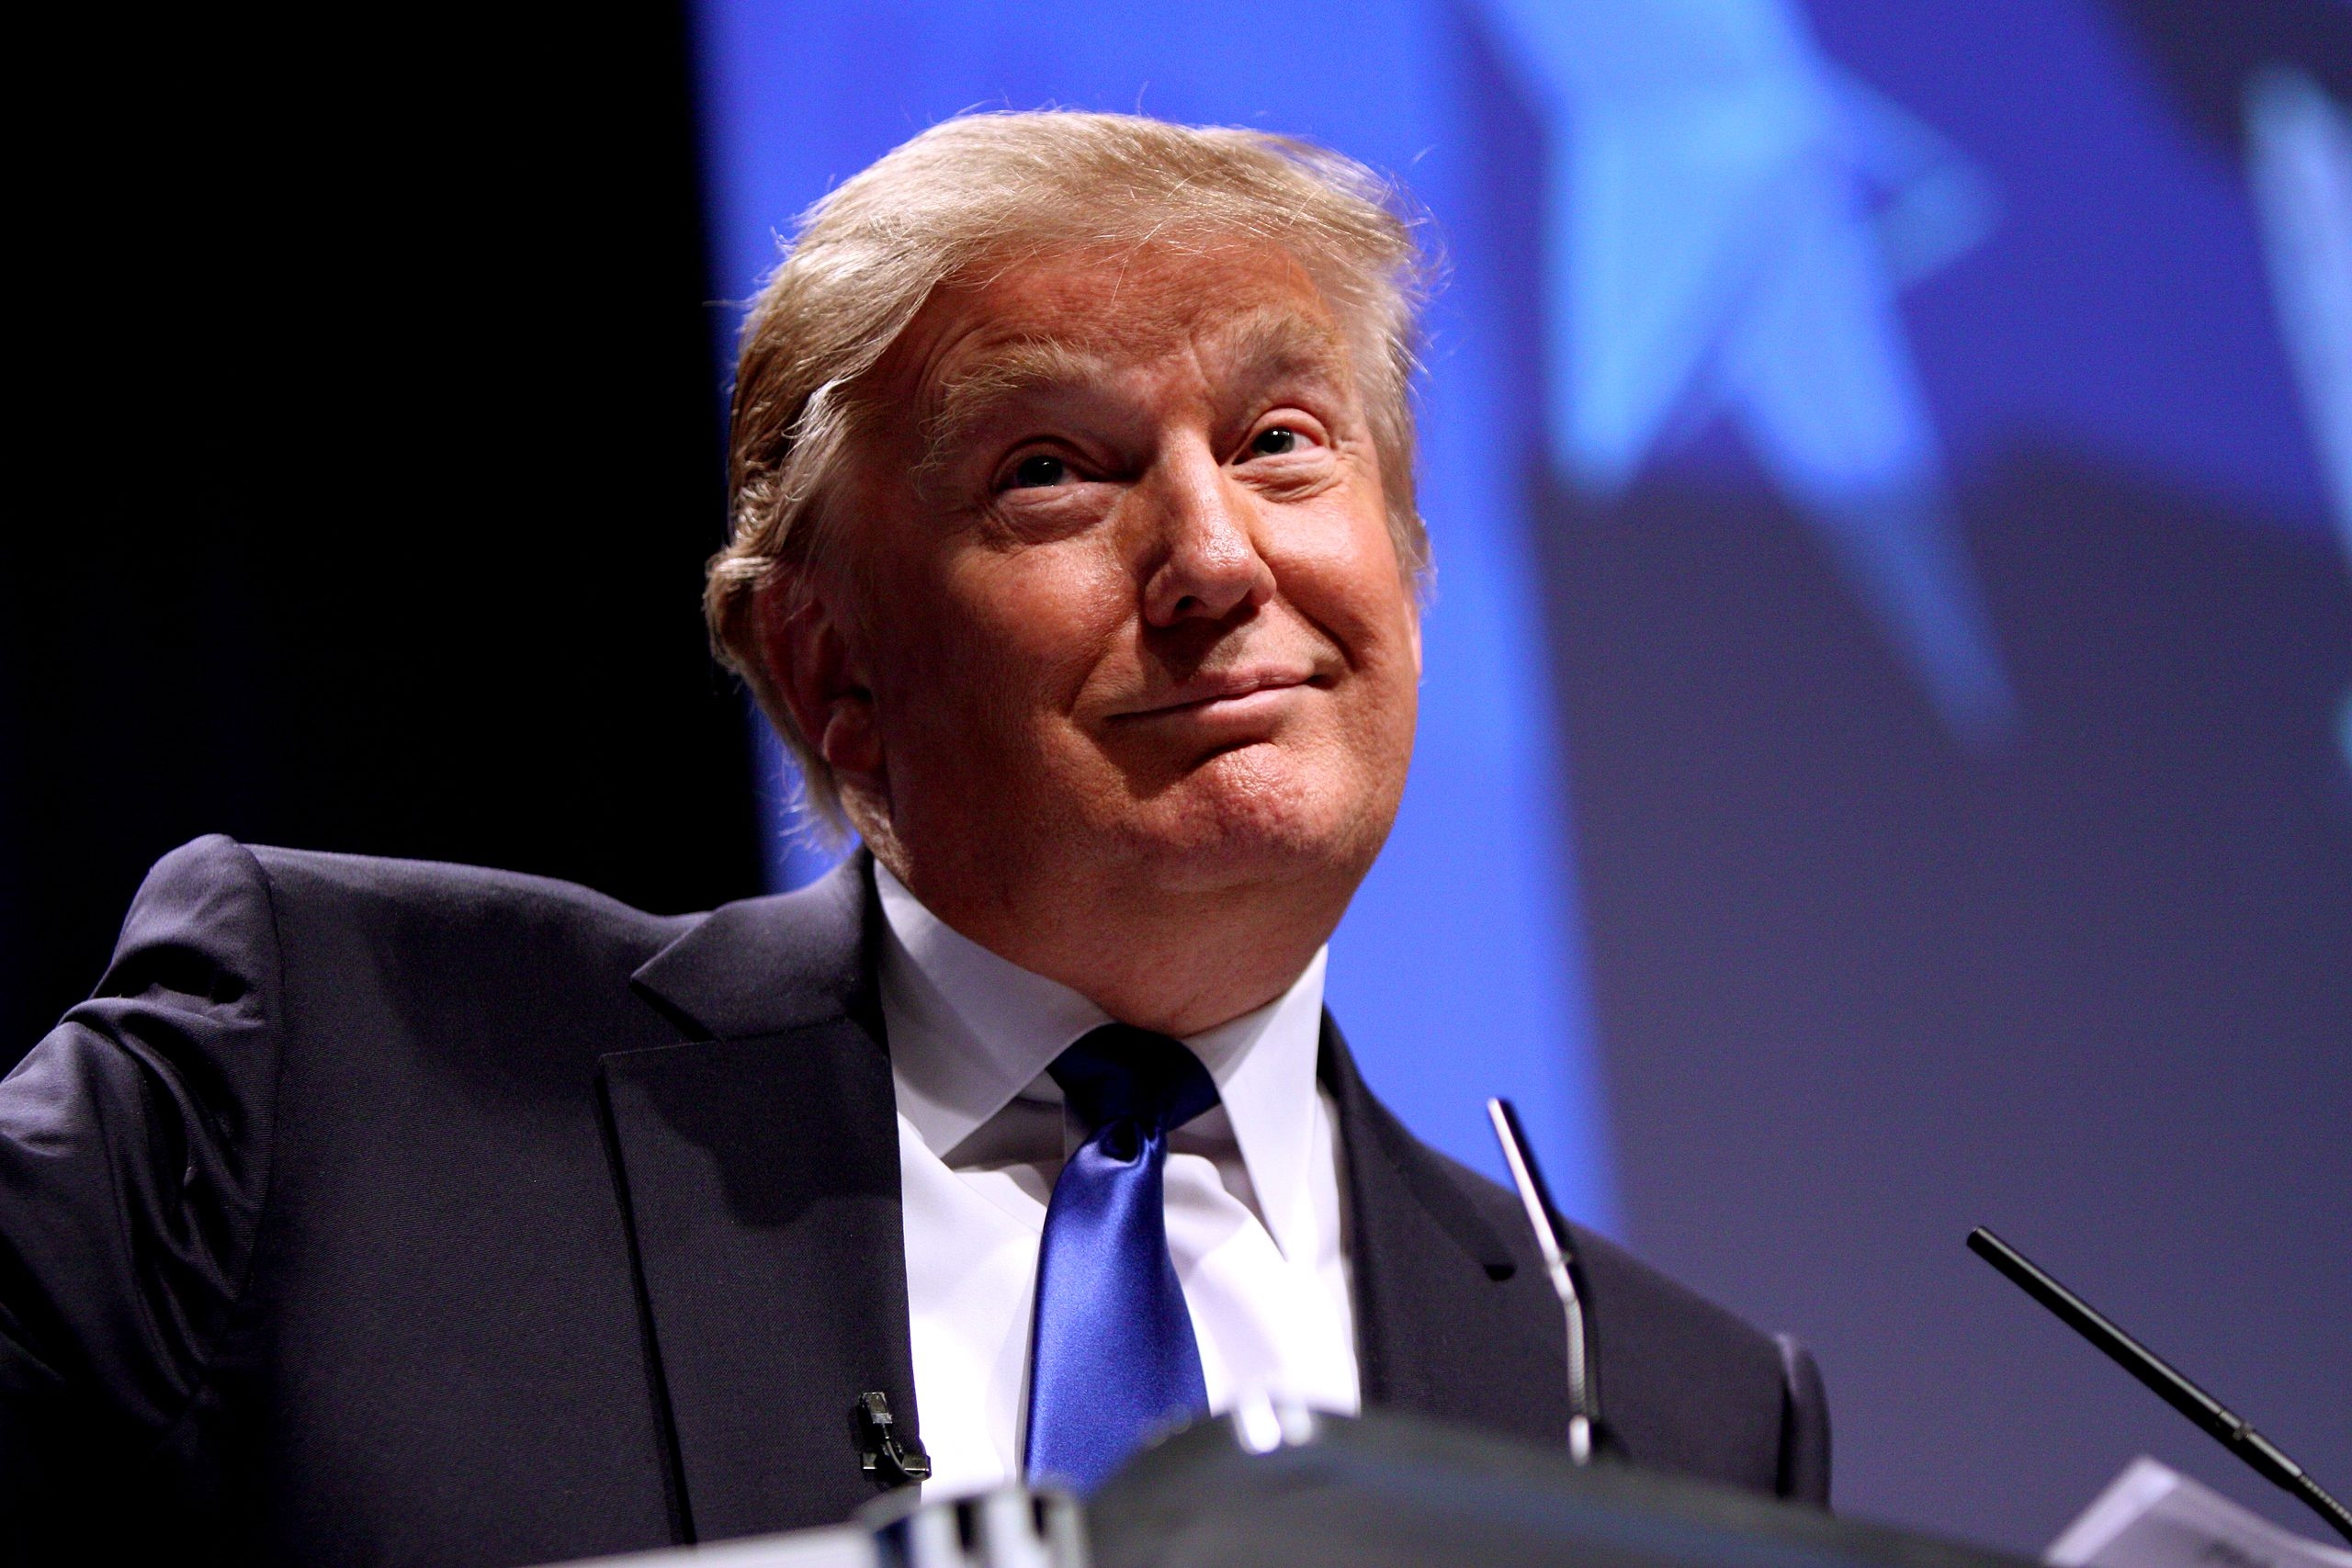 donald trump speaking at the CPAC 2011 conference